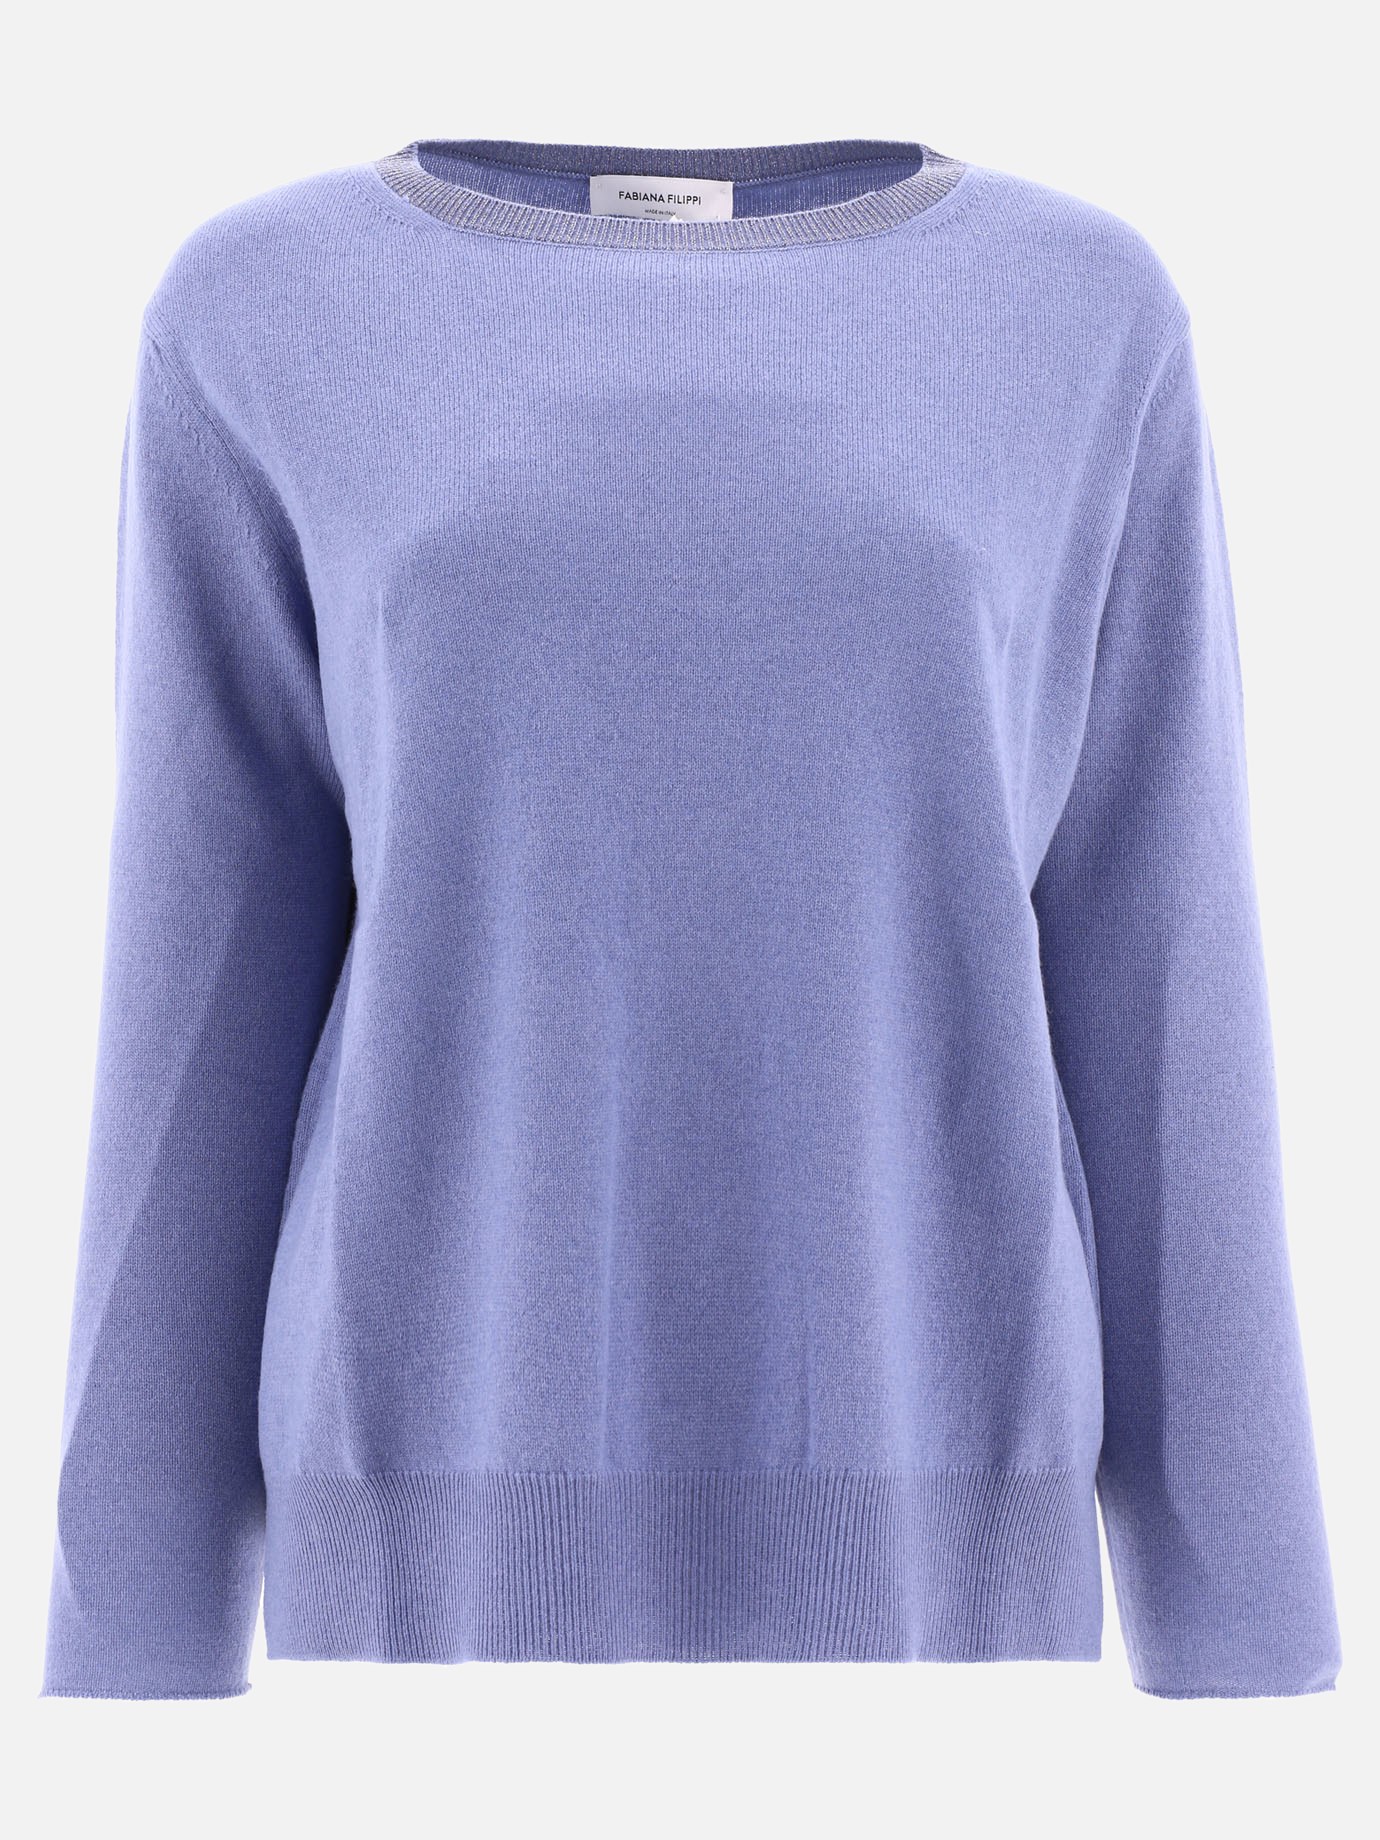 Sweater with lamé collar